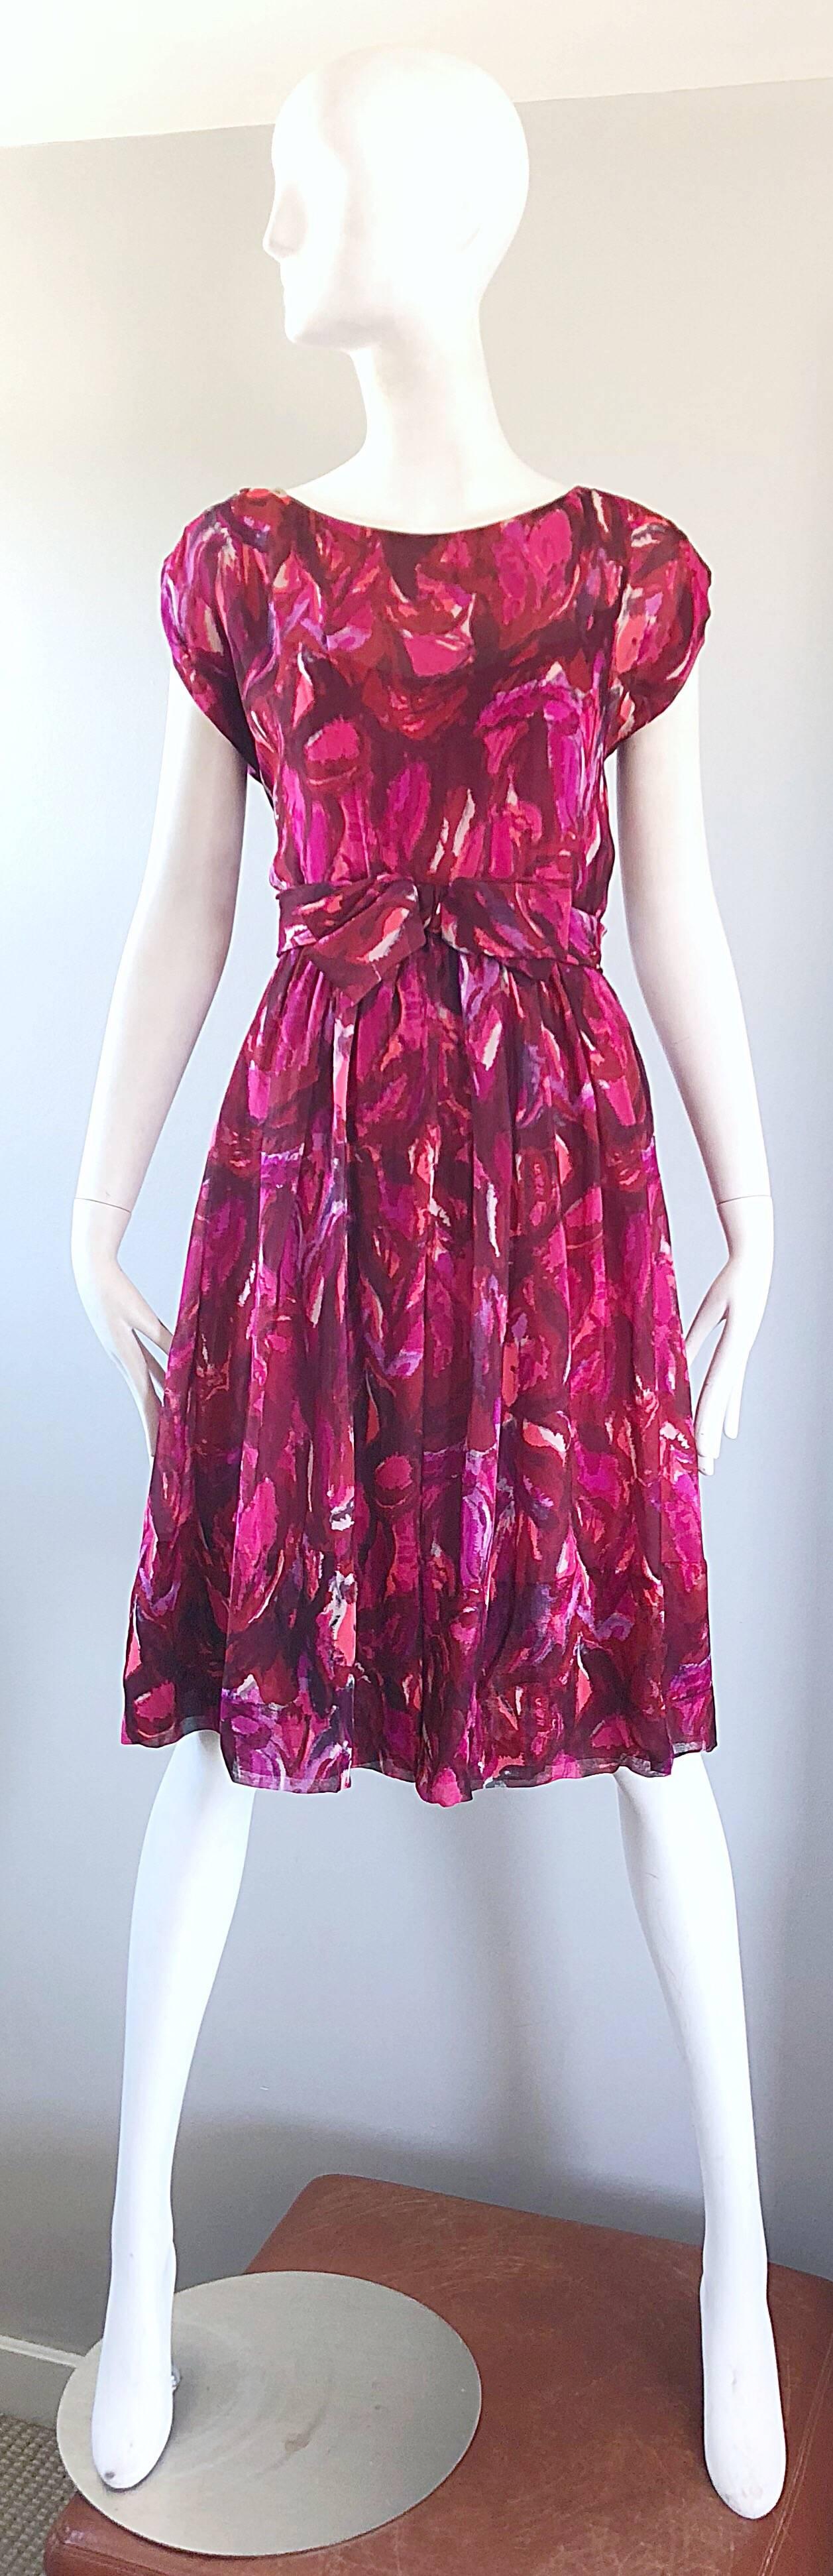 Stunning 1950s vintage WERLE OF BEVERLY HILLS demi couture pink, fuchsia and white watercolor print chiffon silk dress! I once had the long sleeved version of this rare gem, and I was quickly reminded the quality that Werle pieces obtain. Flattering